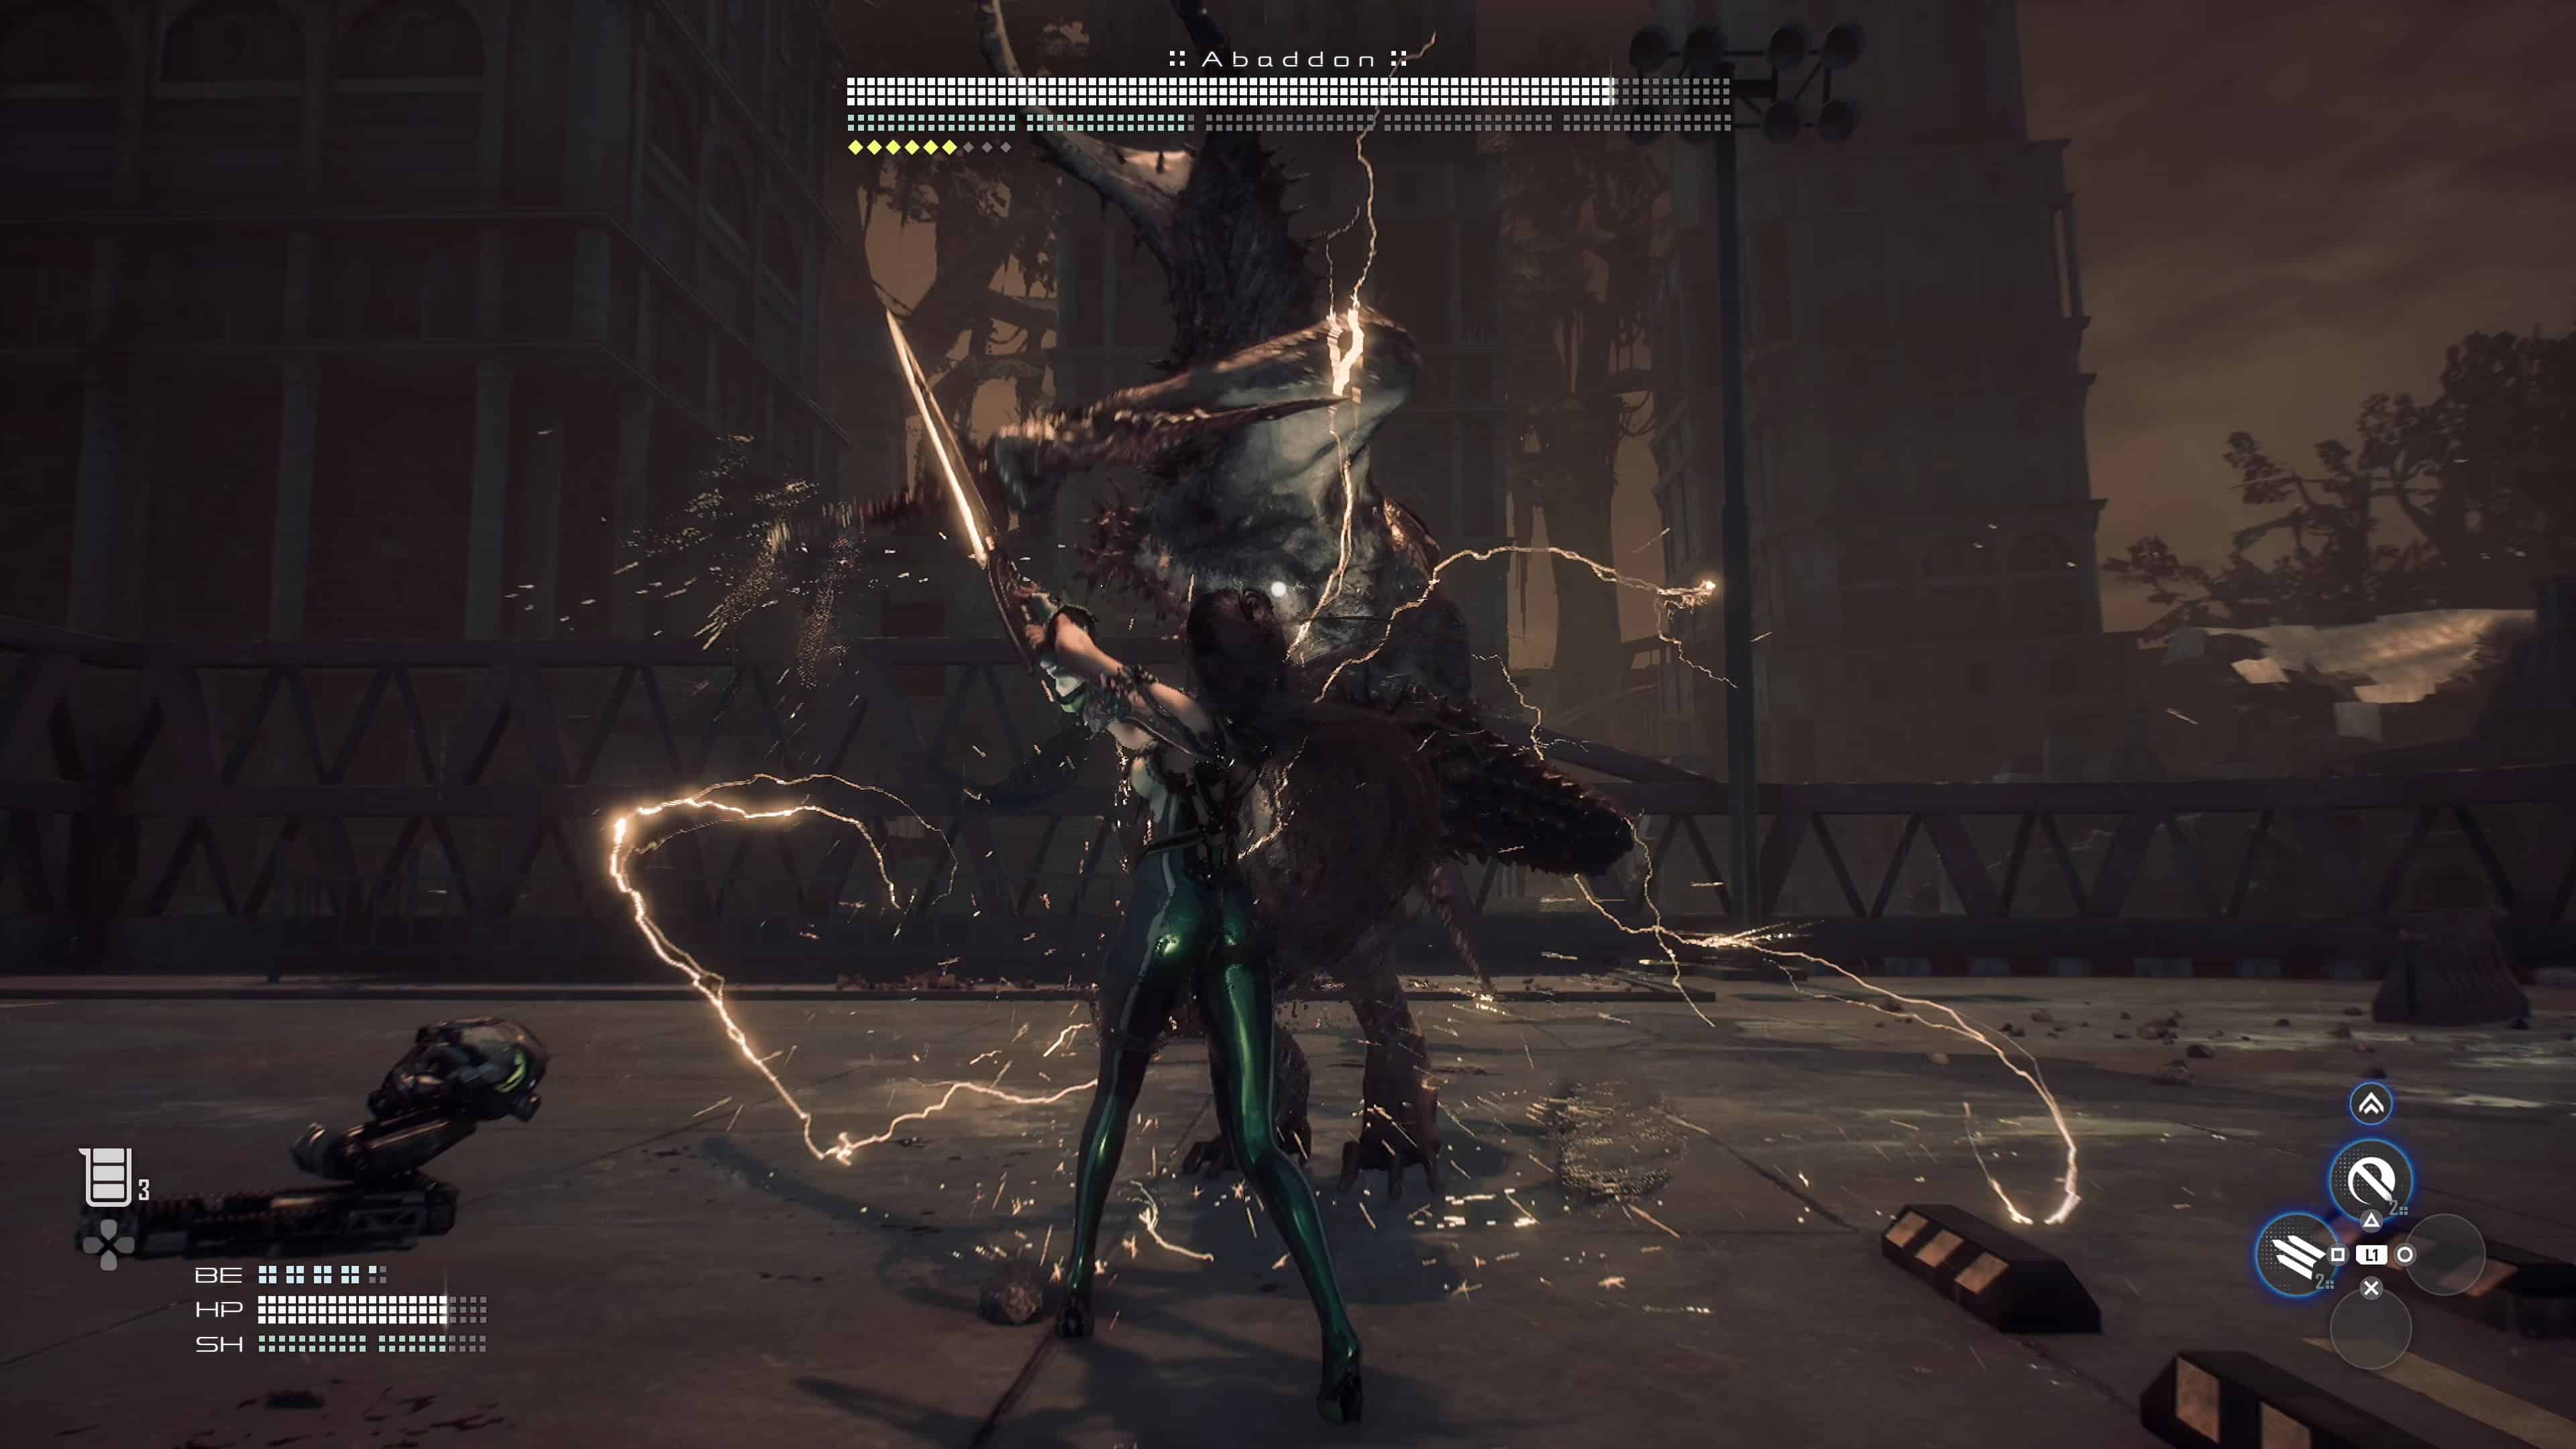 Stellar Blade best Gear- the main character EVE deflects an attack from a large monster